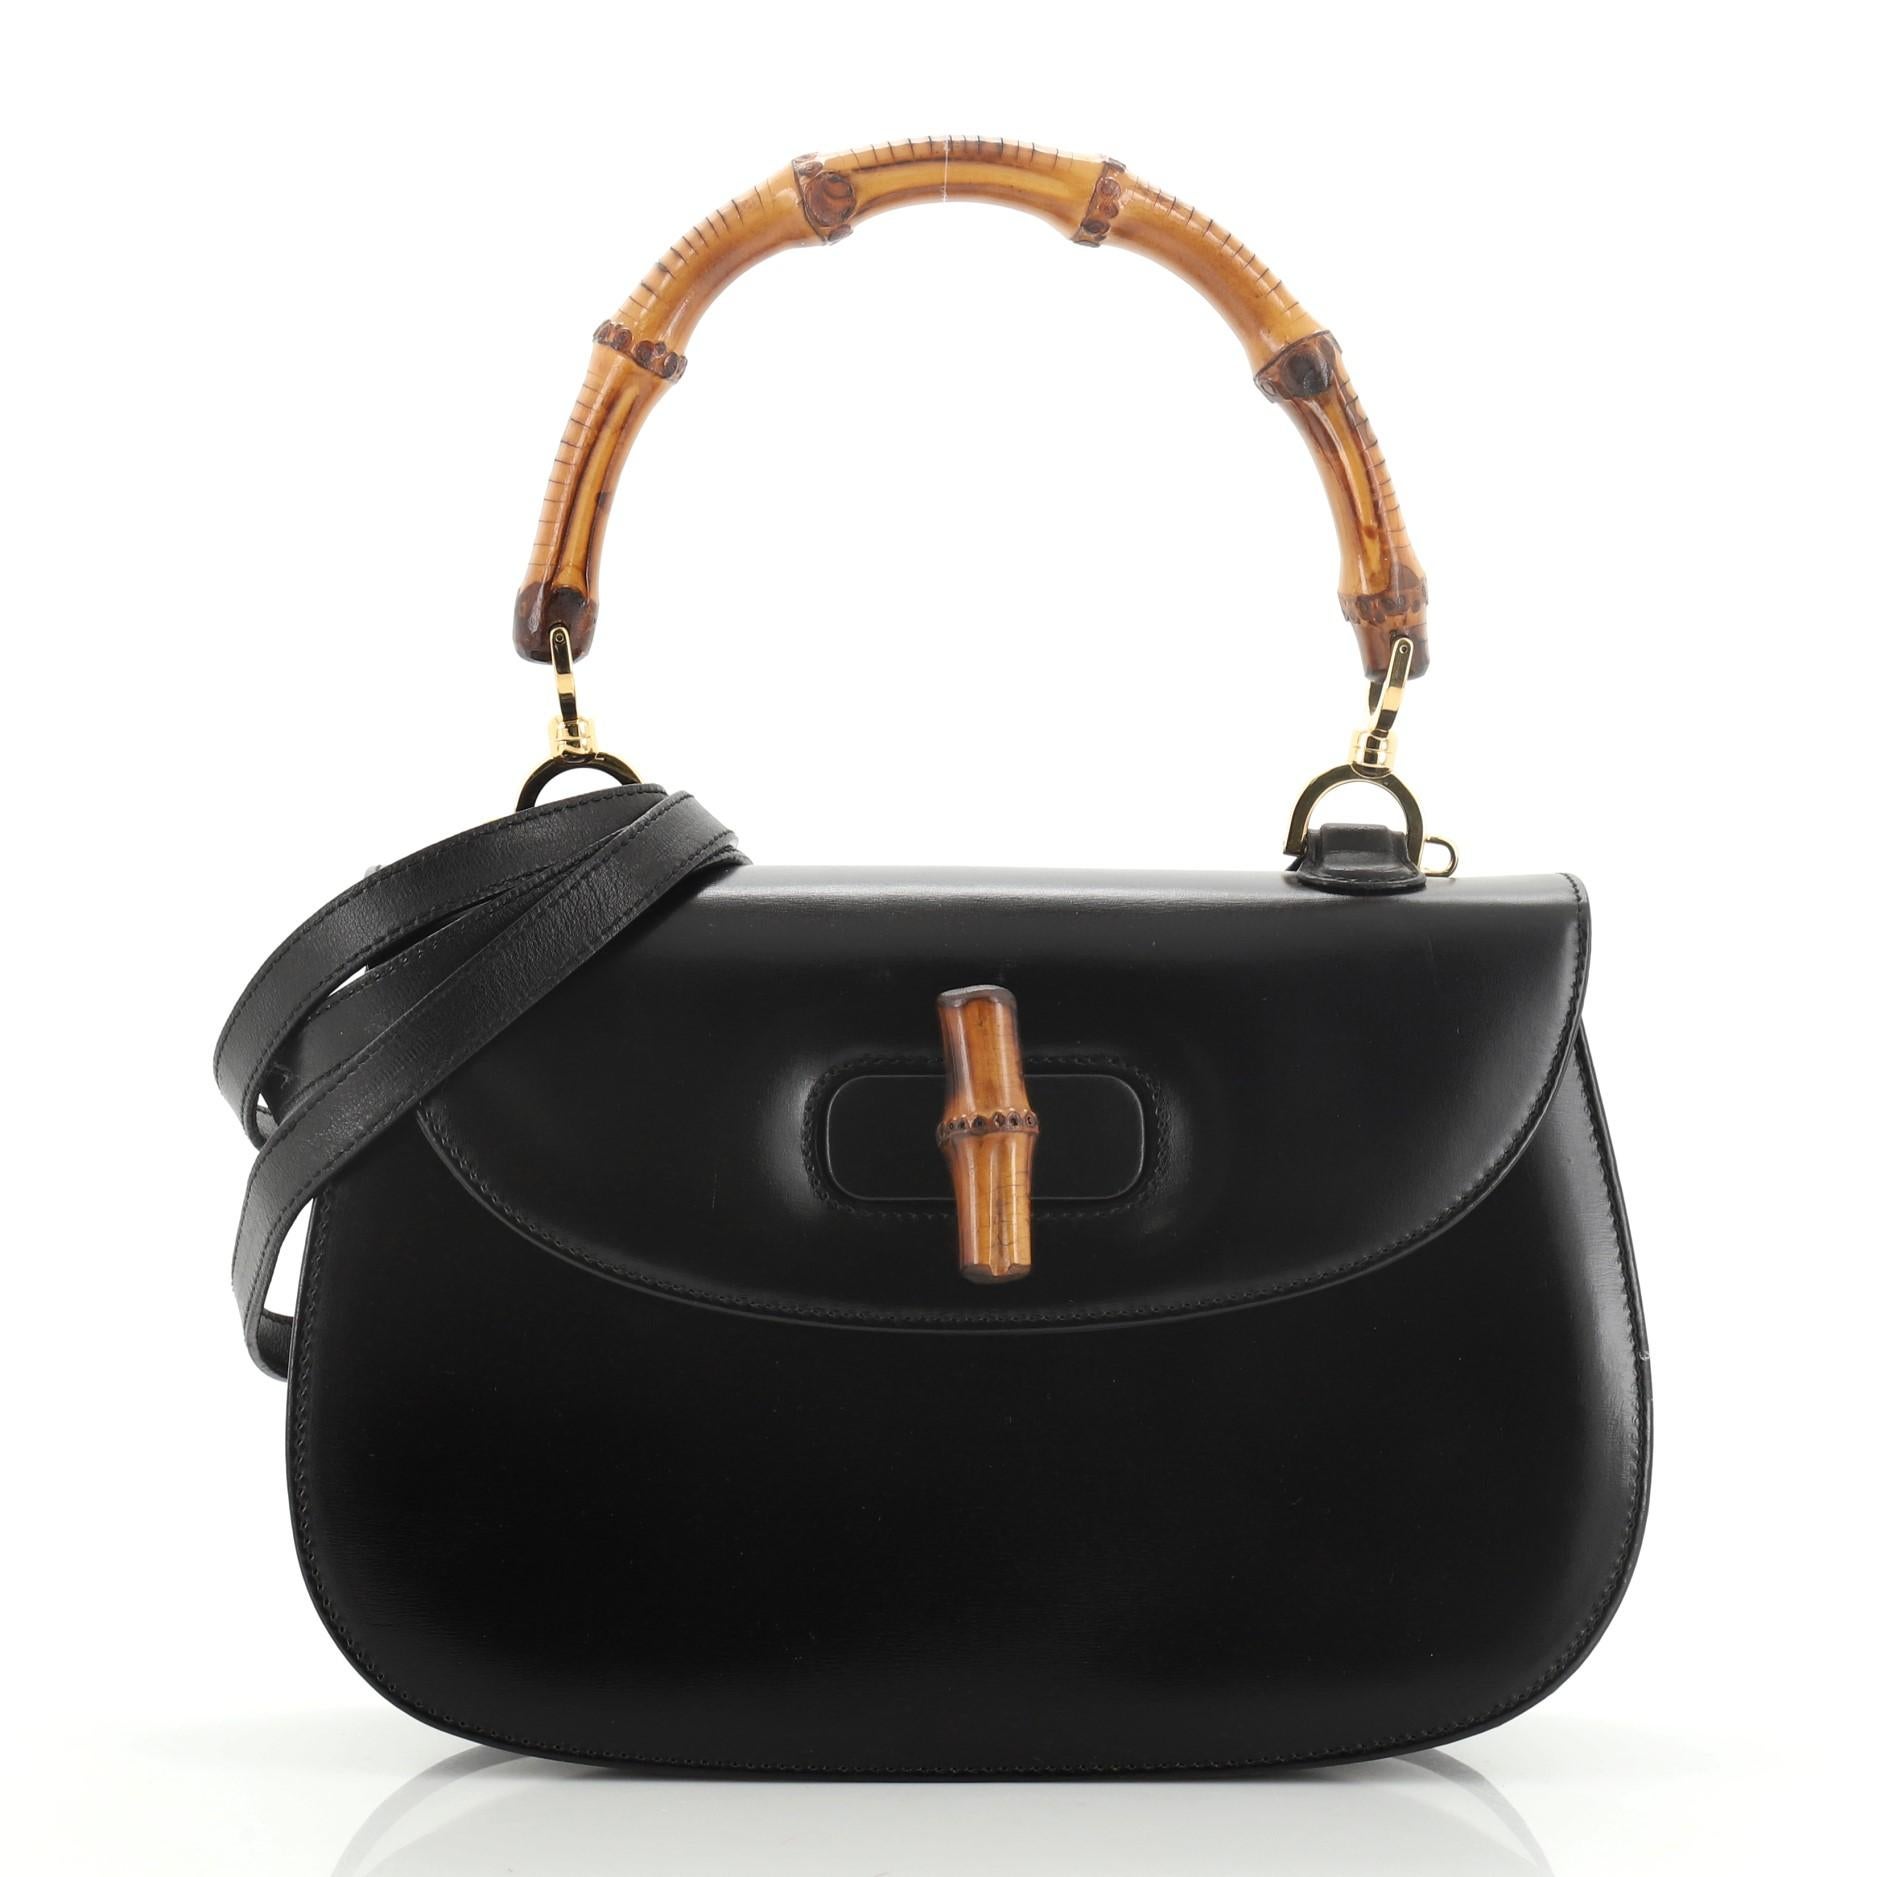 This Gucci Vintage Bamboo Convertible Top Handle Bag Leather Medium, crafted from black leather, features a bamboo top handle and gold-tone hardware. Its bamboo turn-lock closure opens to a red leather interior with side zip and slip pockets.